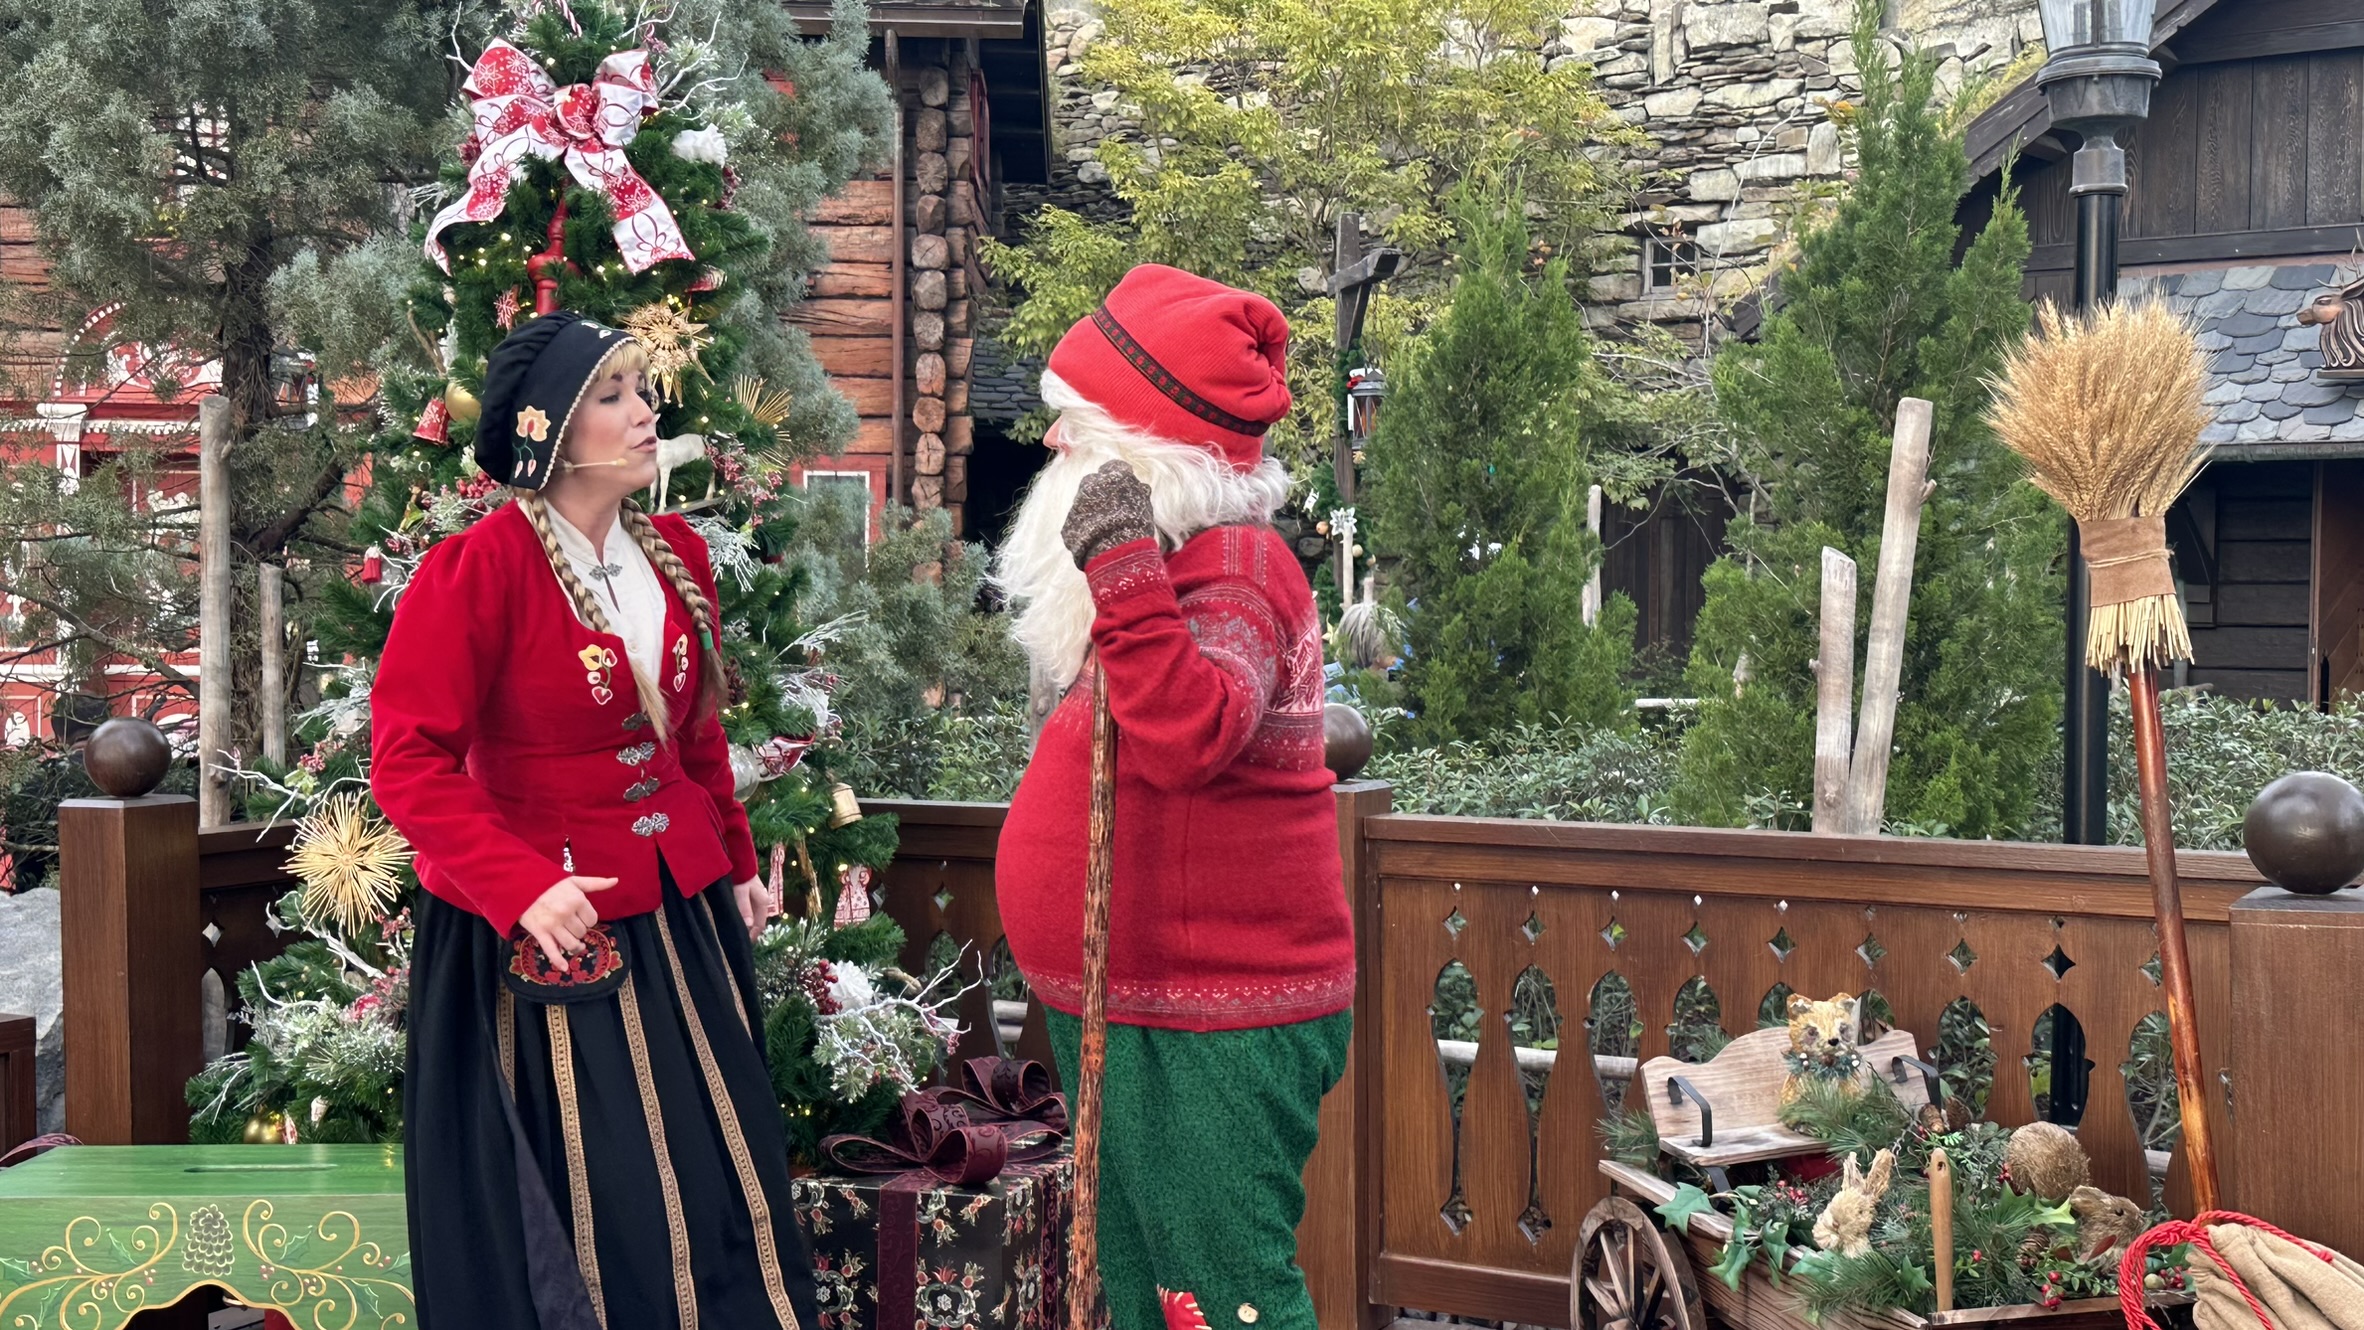 Norway's Holiday Tale Join Sigrid in an Yuletide Story with a Trickster Barn Santa at World Showcase